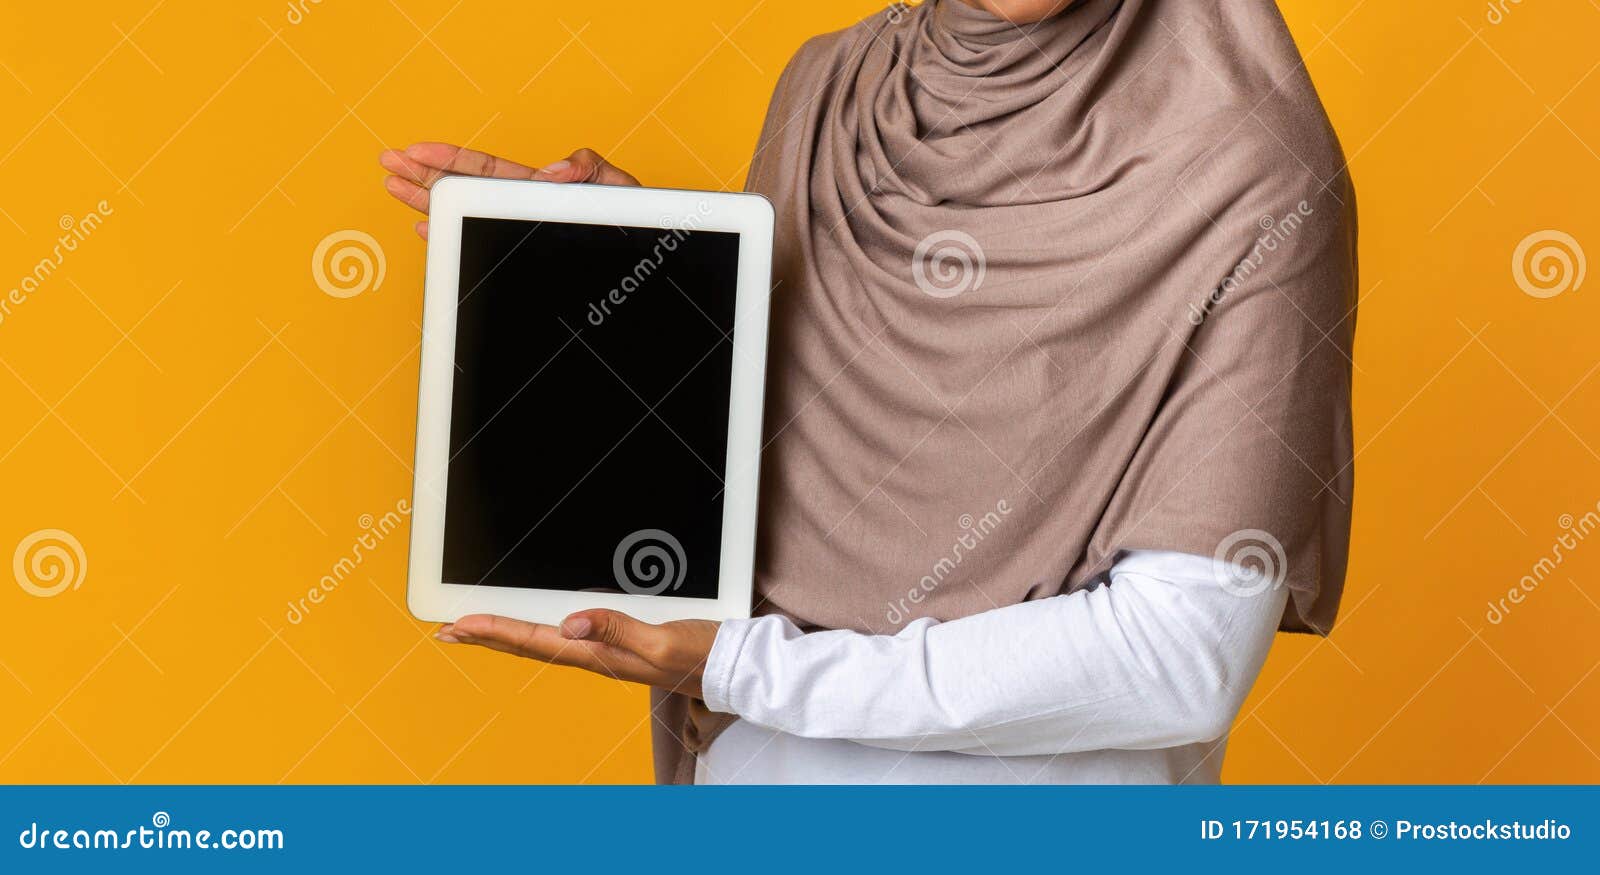 Download Unrecognizable Woman In Headscarf Holding Digital Tablet ...